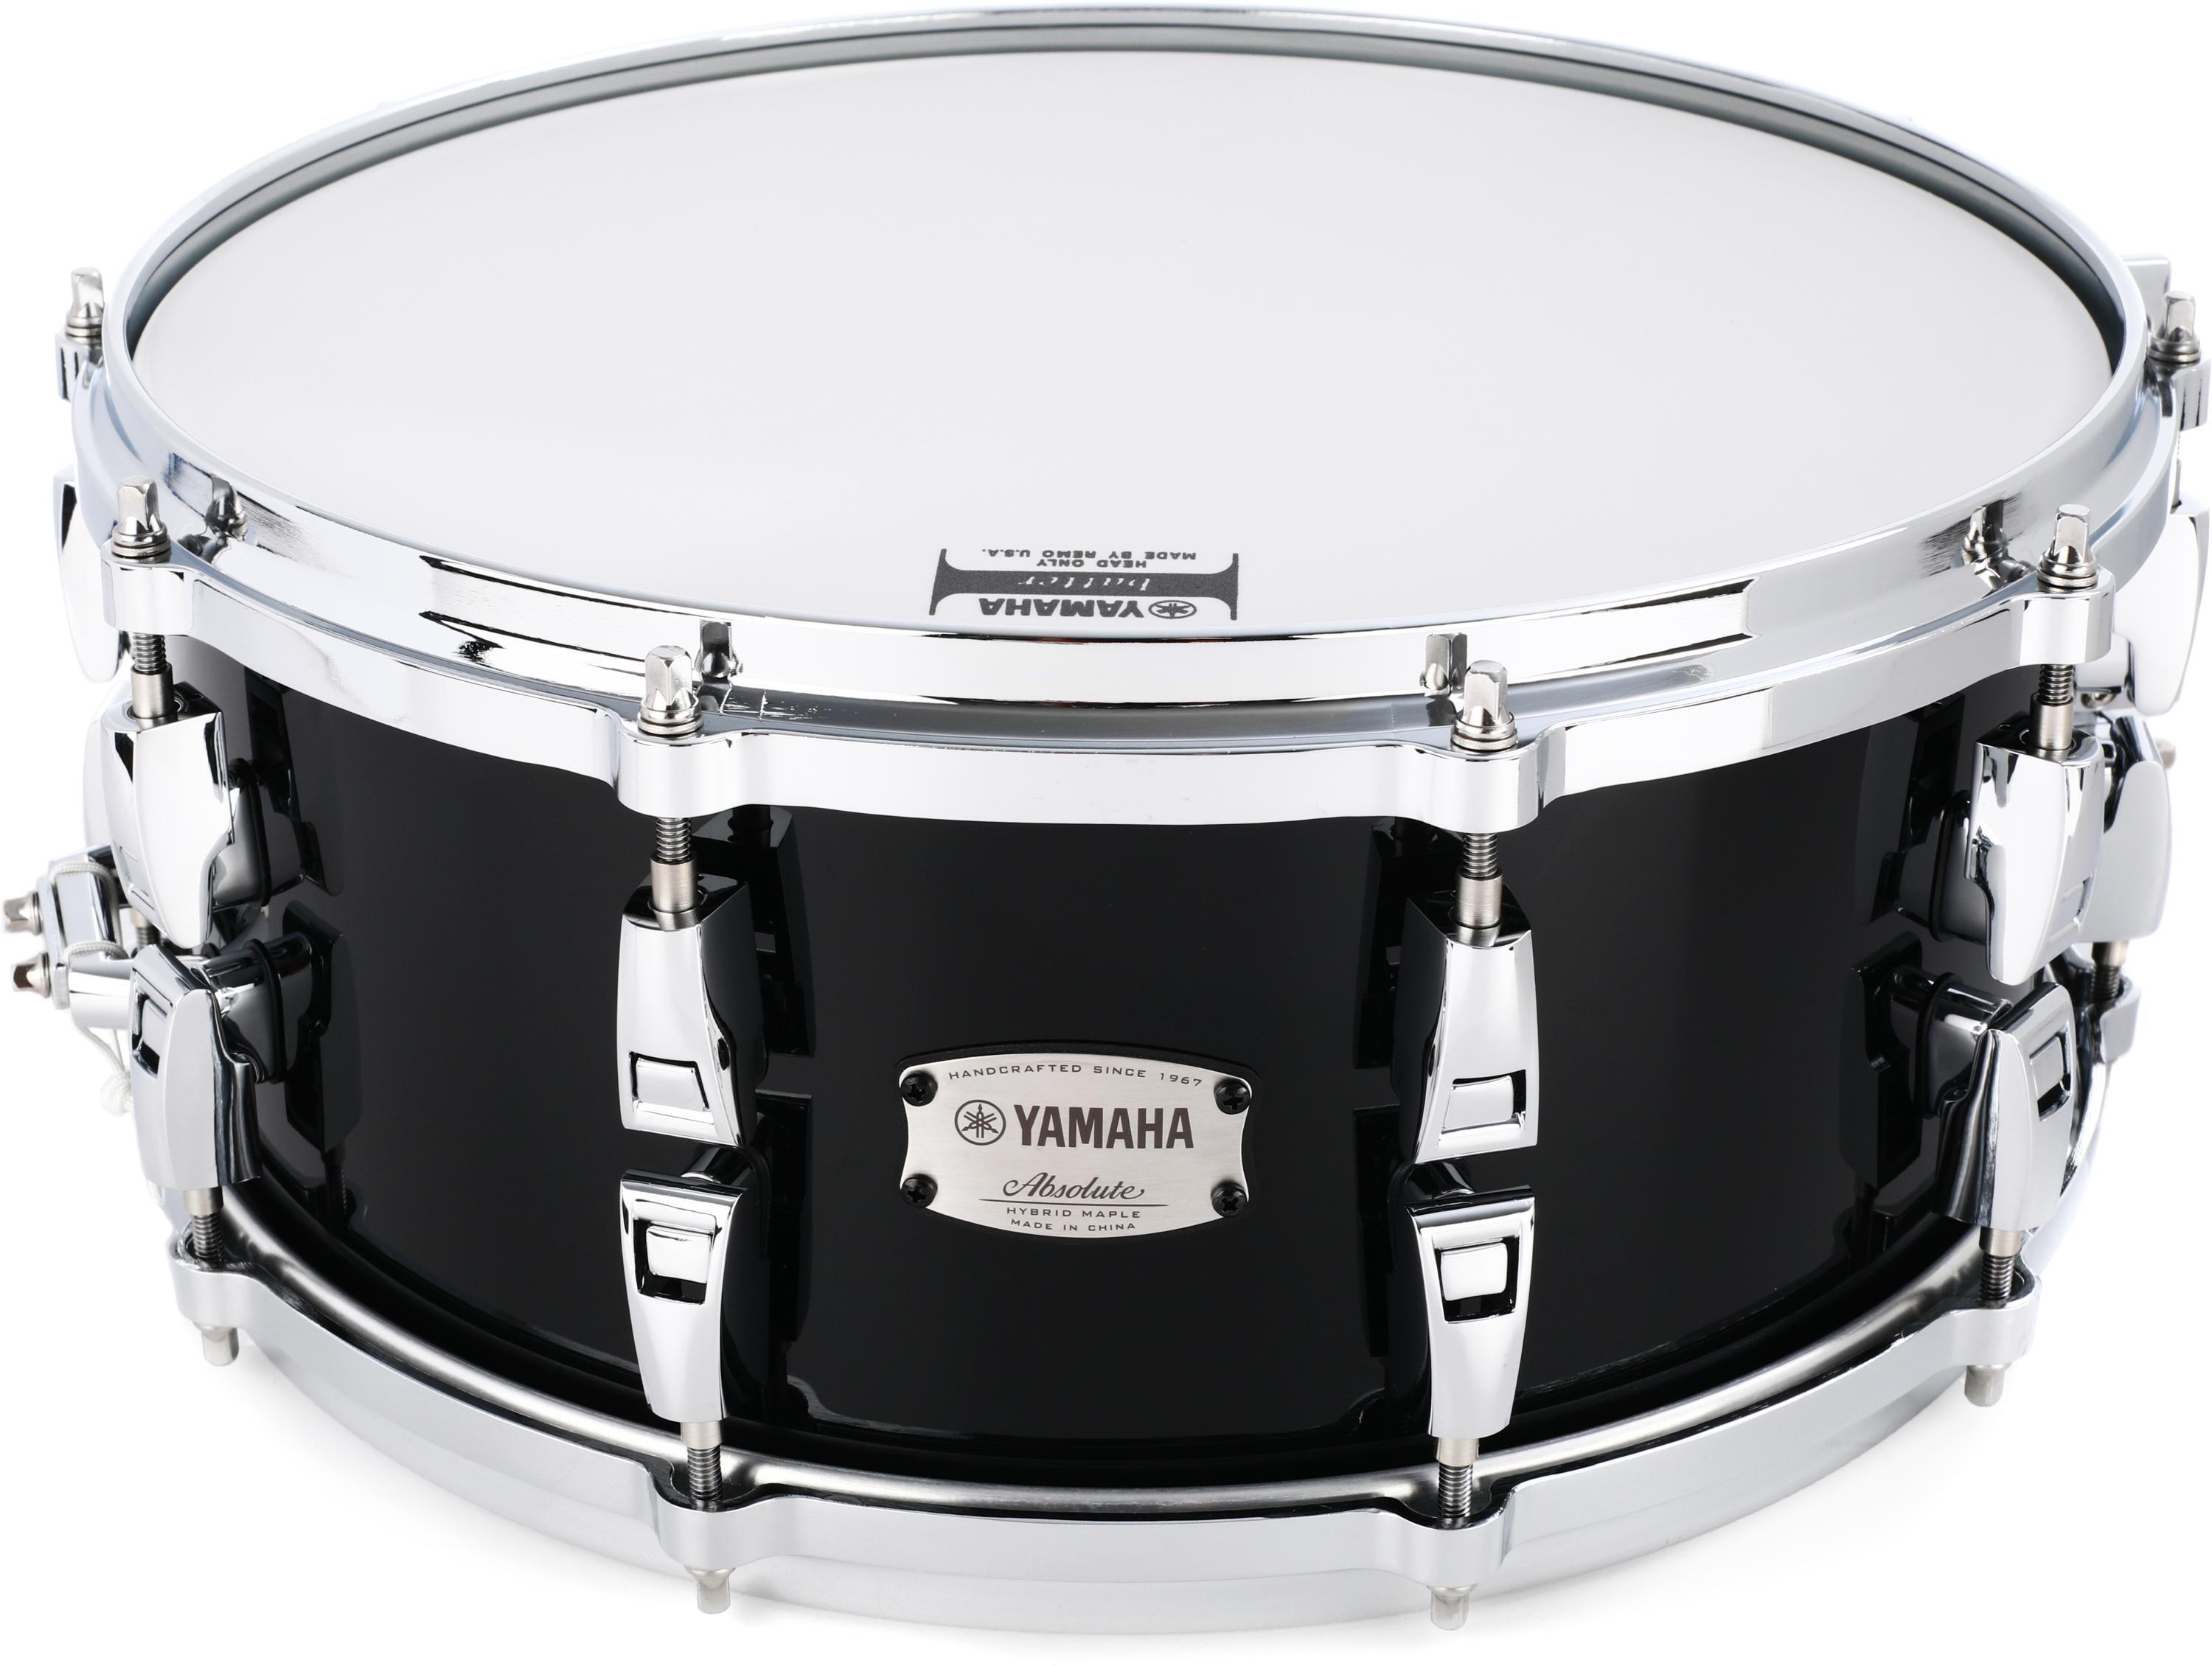 Yamaha AMS-1460 Absolute Hybrid Maple 6 x 14-inch Snare Drum - Solid Black